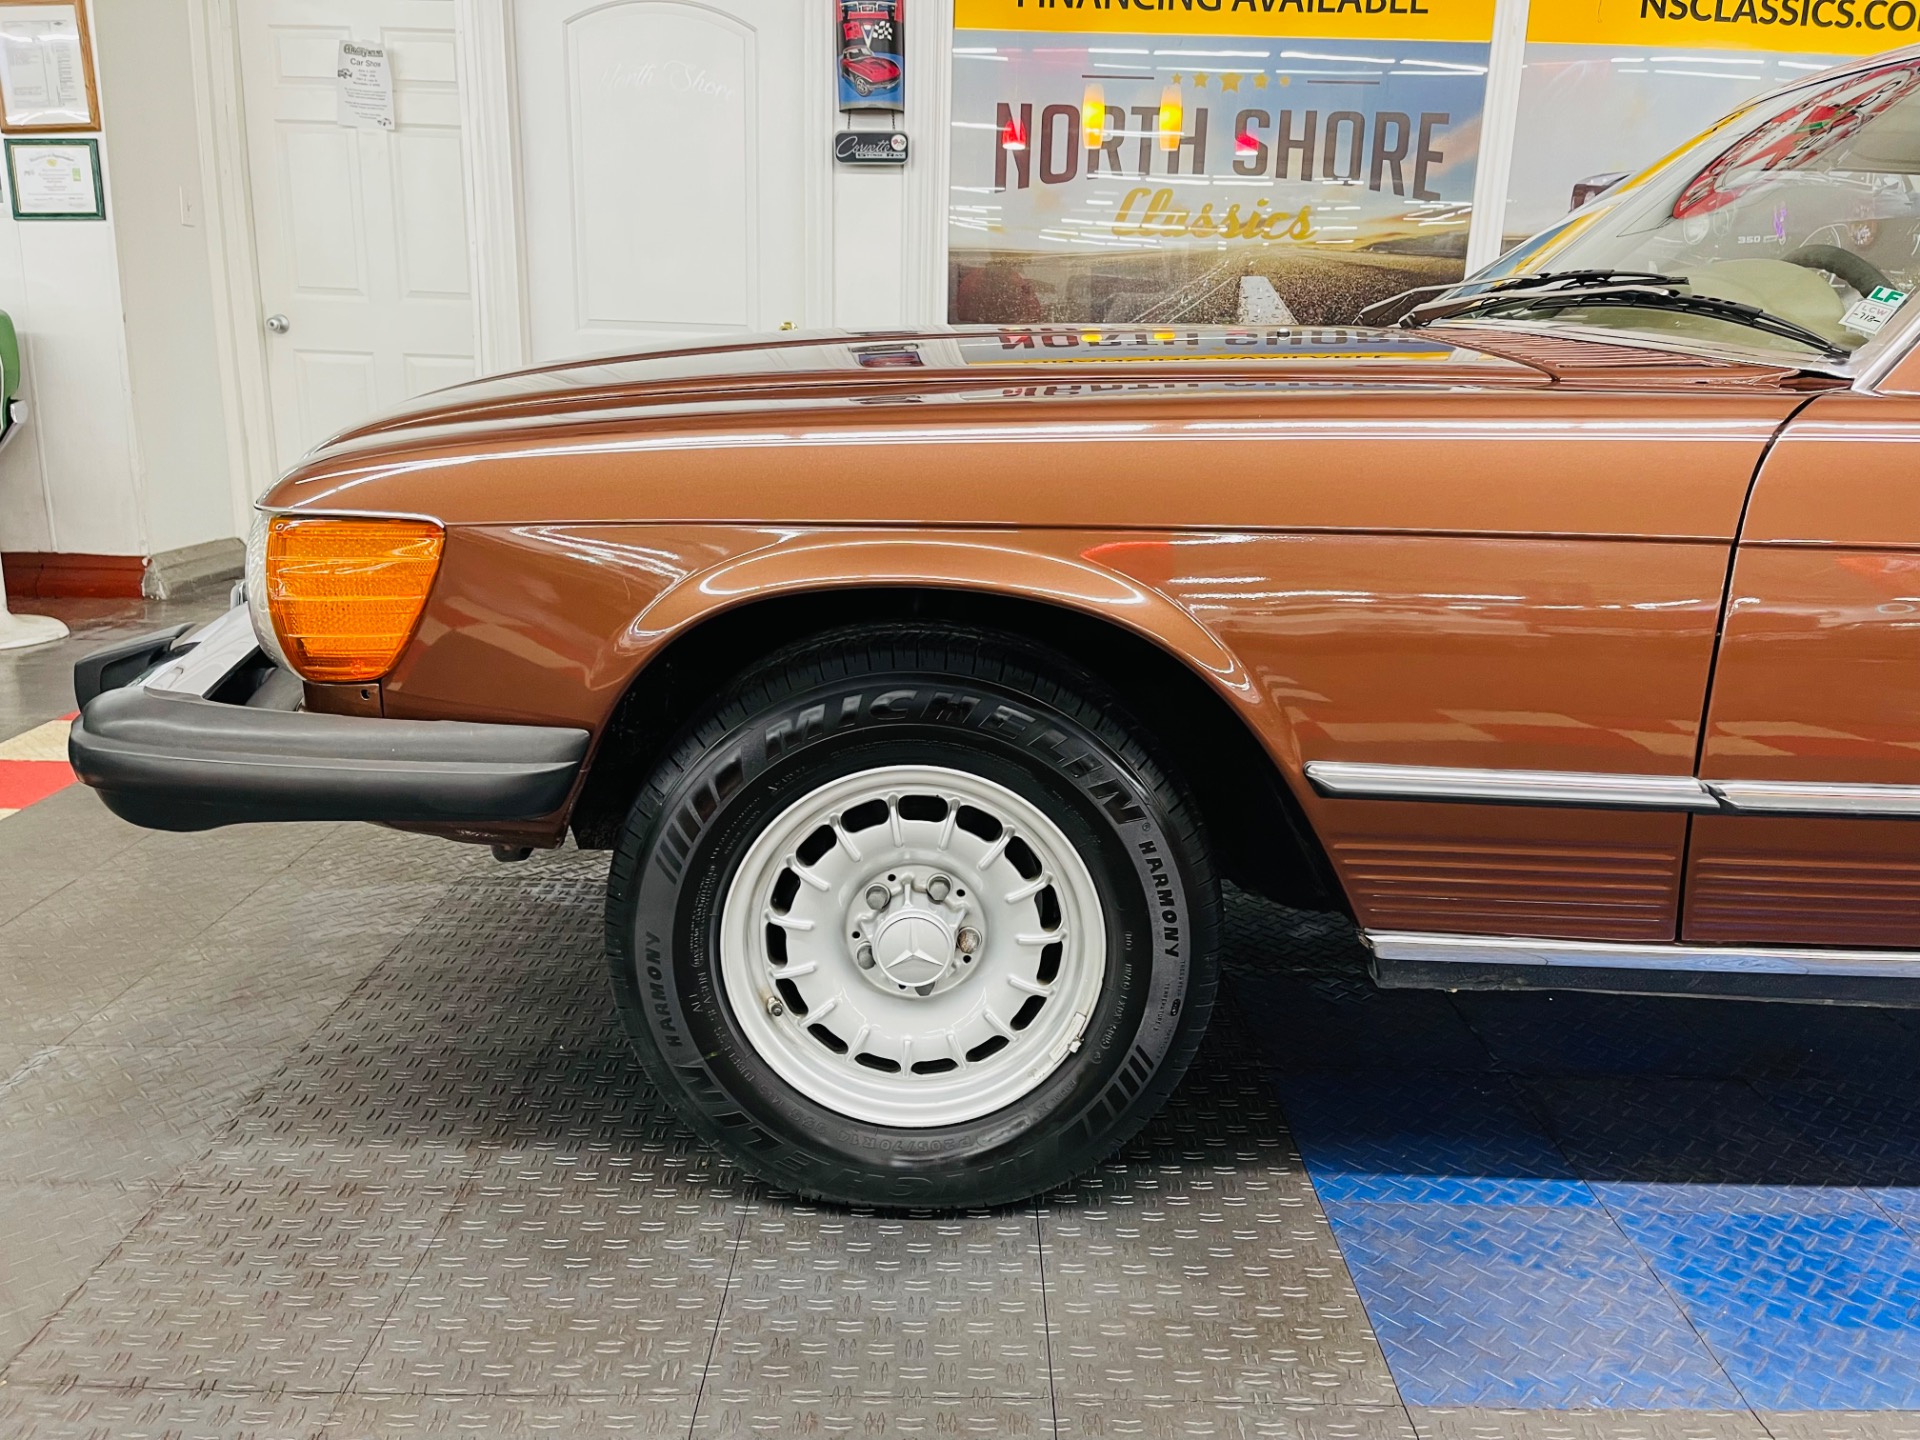 Used 1978 Mercedes Benz 450 SLC - VERY CLEAN COUPE For Sale 